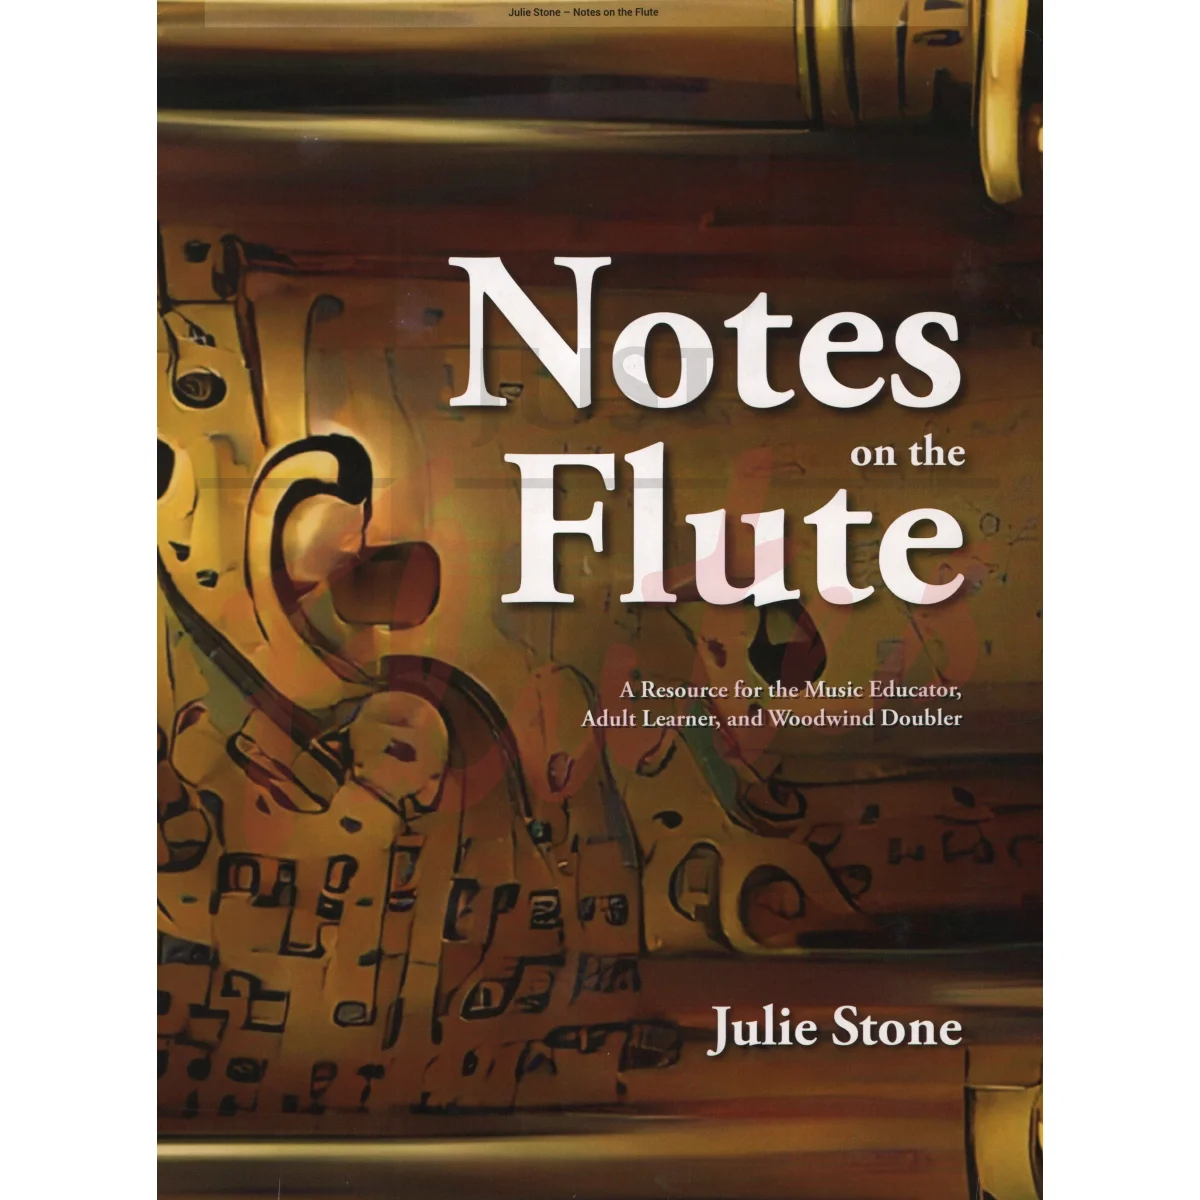 Notes on the Flute